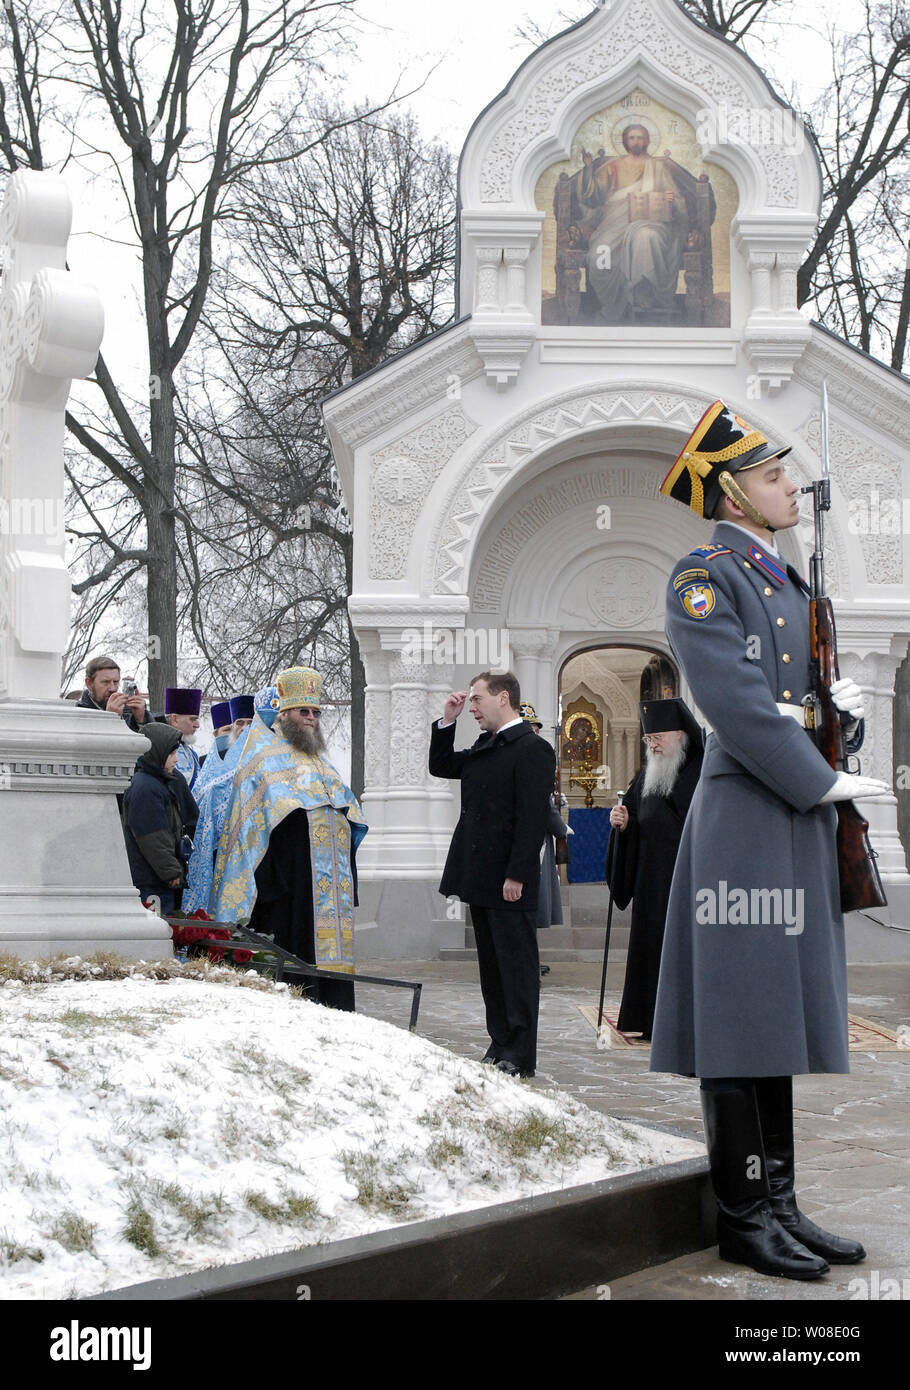 Russian President Dmitry Medvedev crosses himself in the ancient Russian town of Suzdal, about 200 km (124 miles) east of Moscow, during the unveiling ceremony of a new chapel to mark the National Unity Day on November 4, 2009. UPI/Alex Volgin Stock Photo